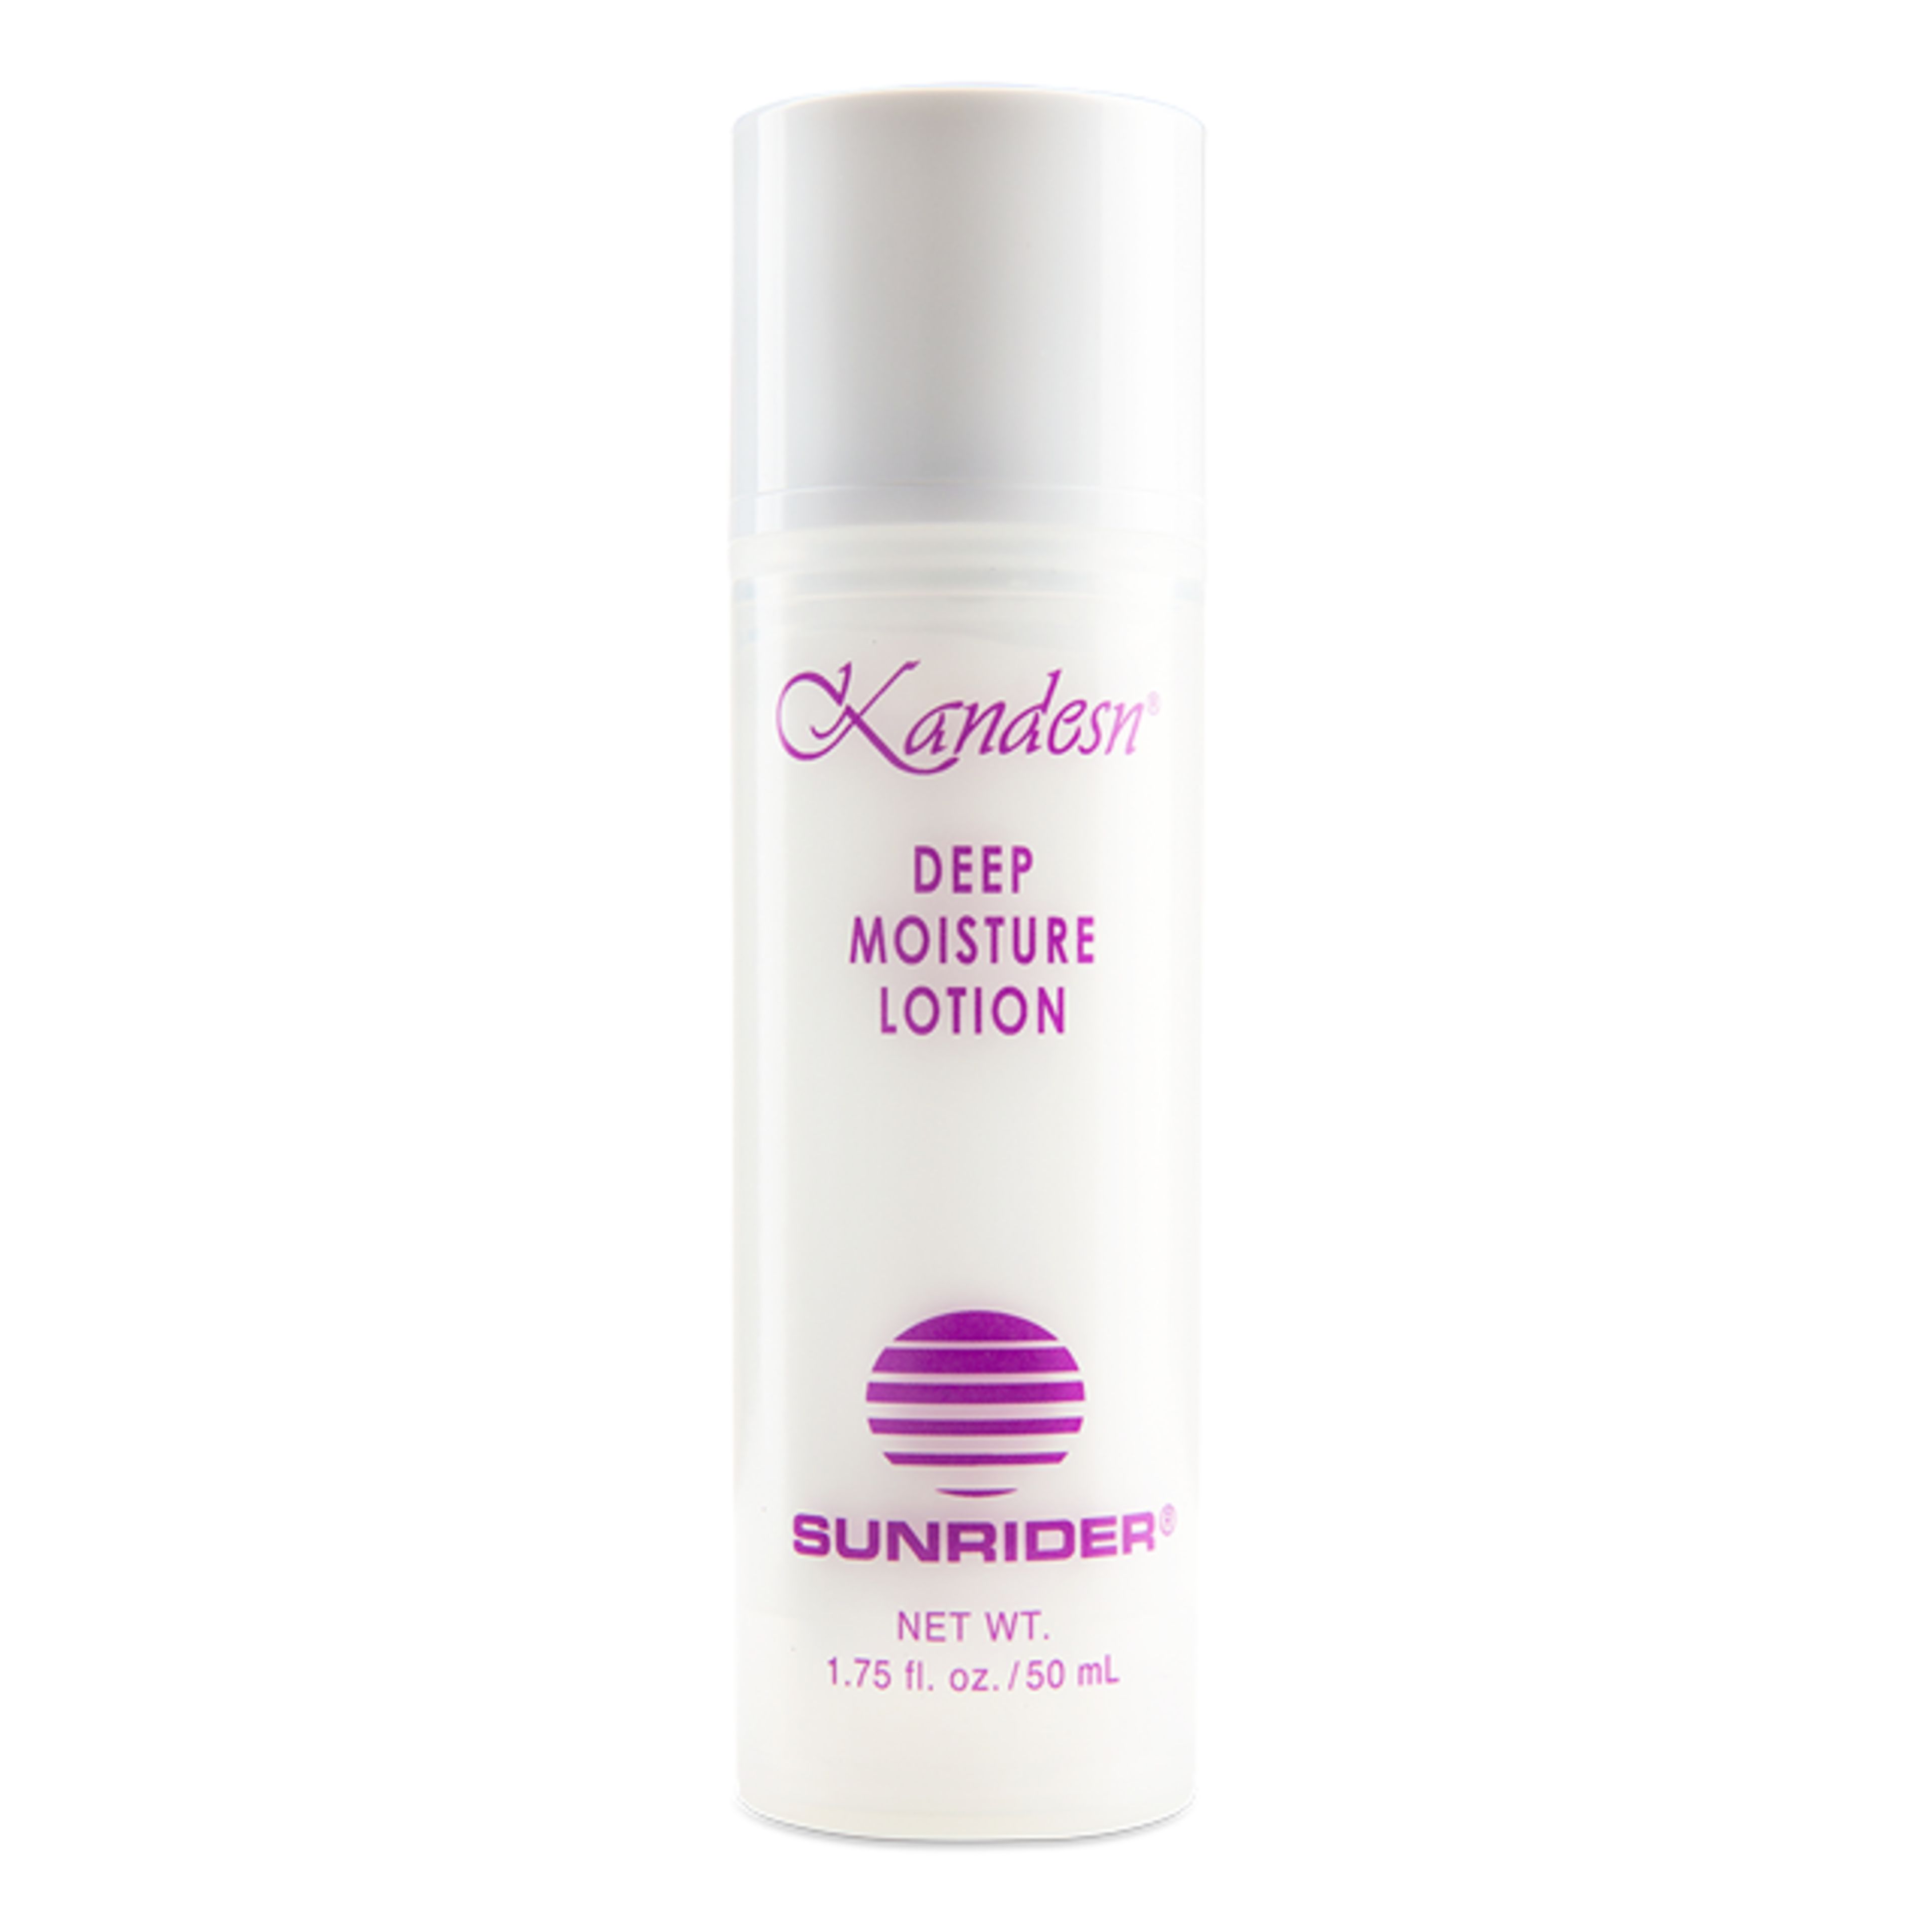 0124134-Kandesn-Deep-Moisture-Lotion-50ml-In.png